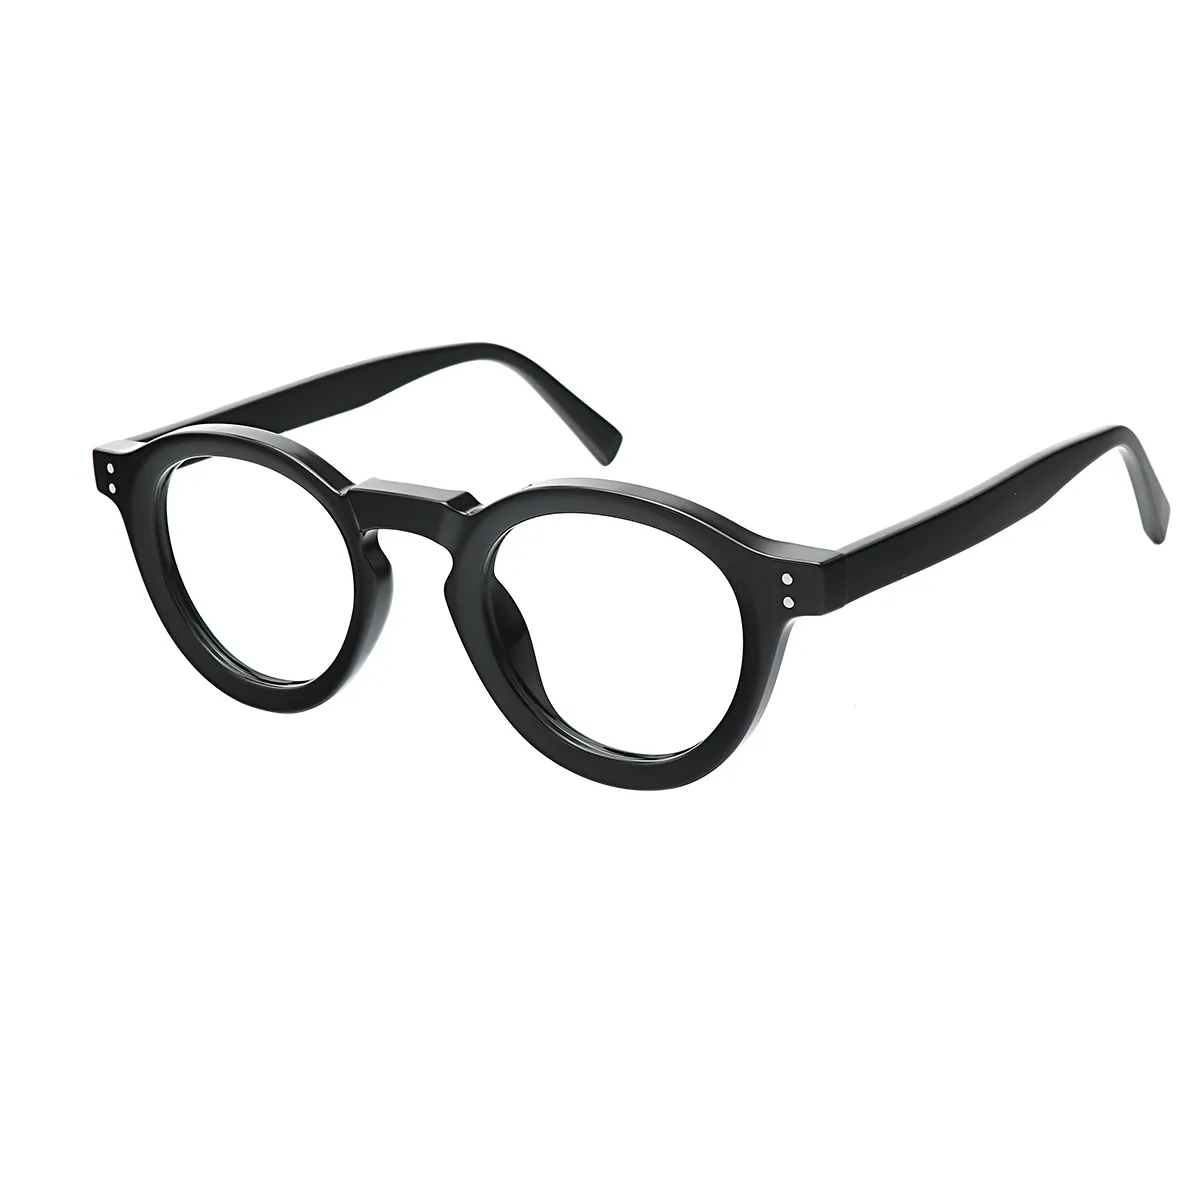 Fashion Round Gray-Transparent Glasses for Women